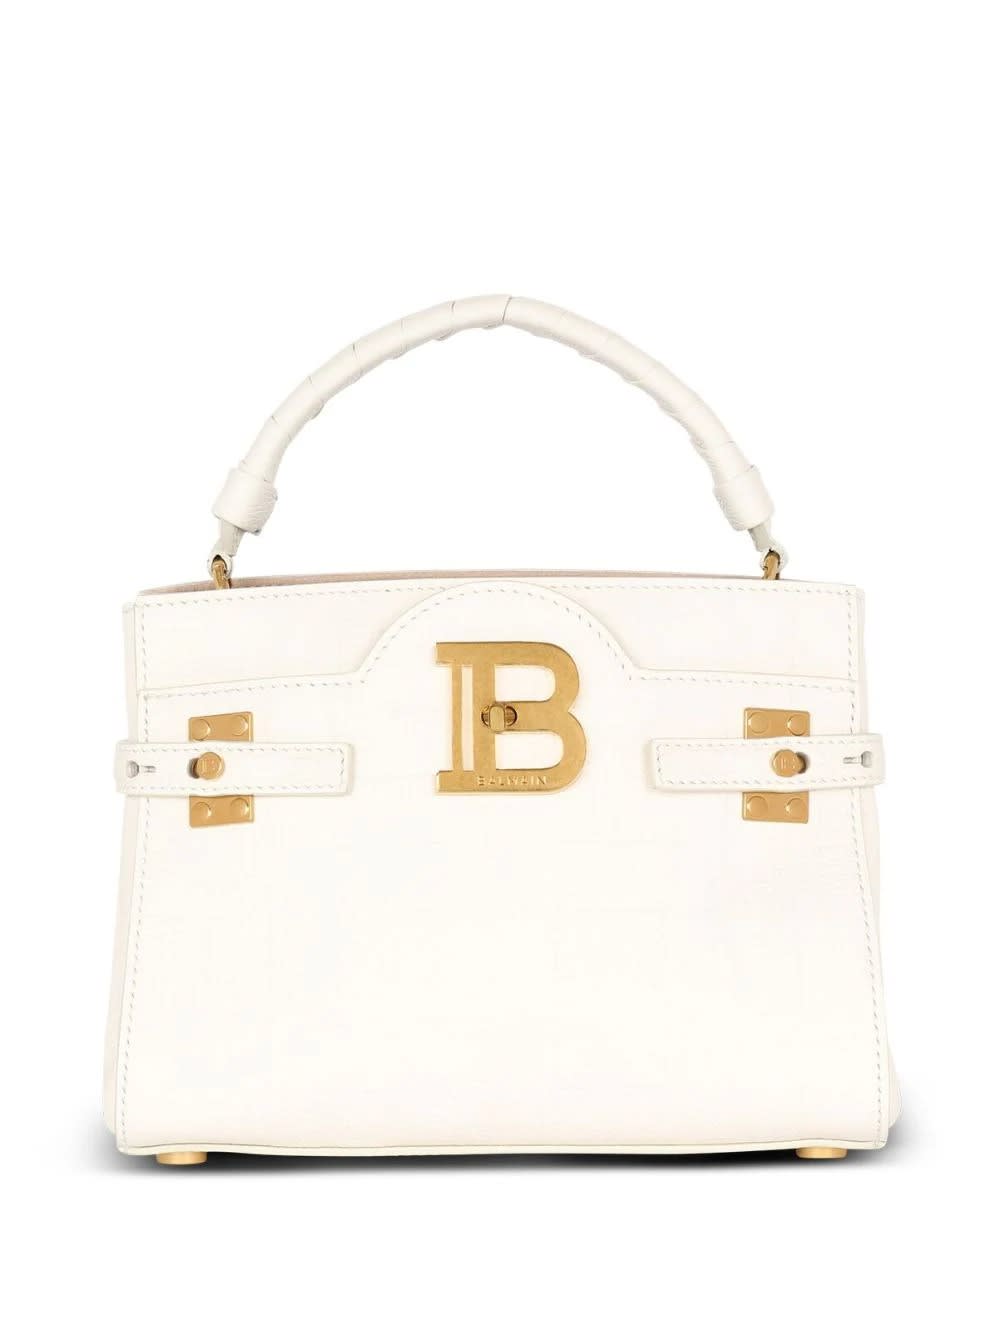 BALMAIN B-BUZZ 22 TOP HANDLE BAG IN WHITE GRAINED LEATHER WITH MONOGRAM